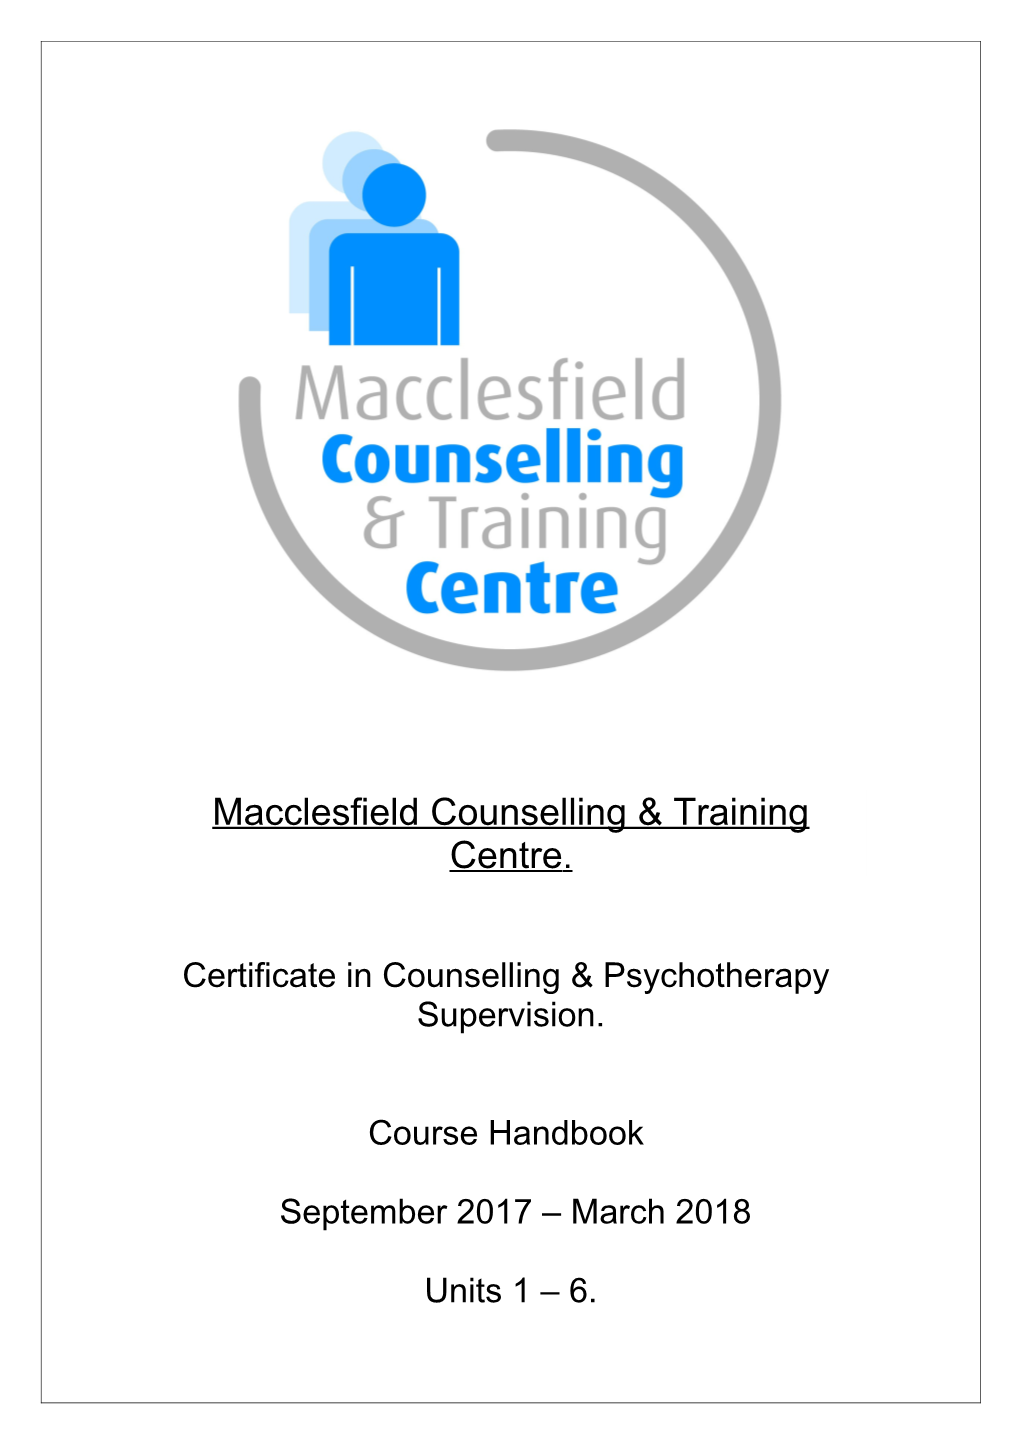 Macclesfield Counselling & Training Centre